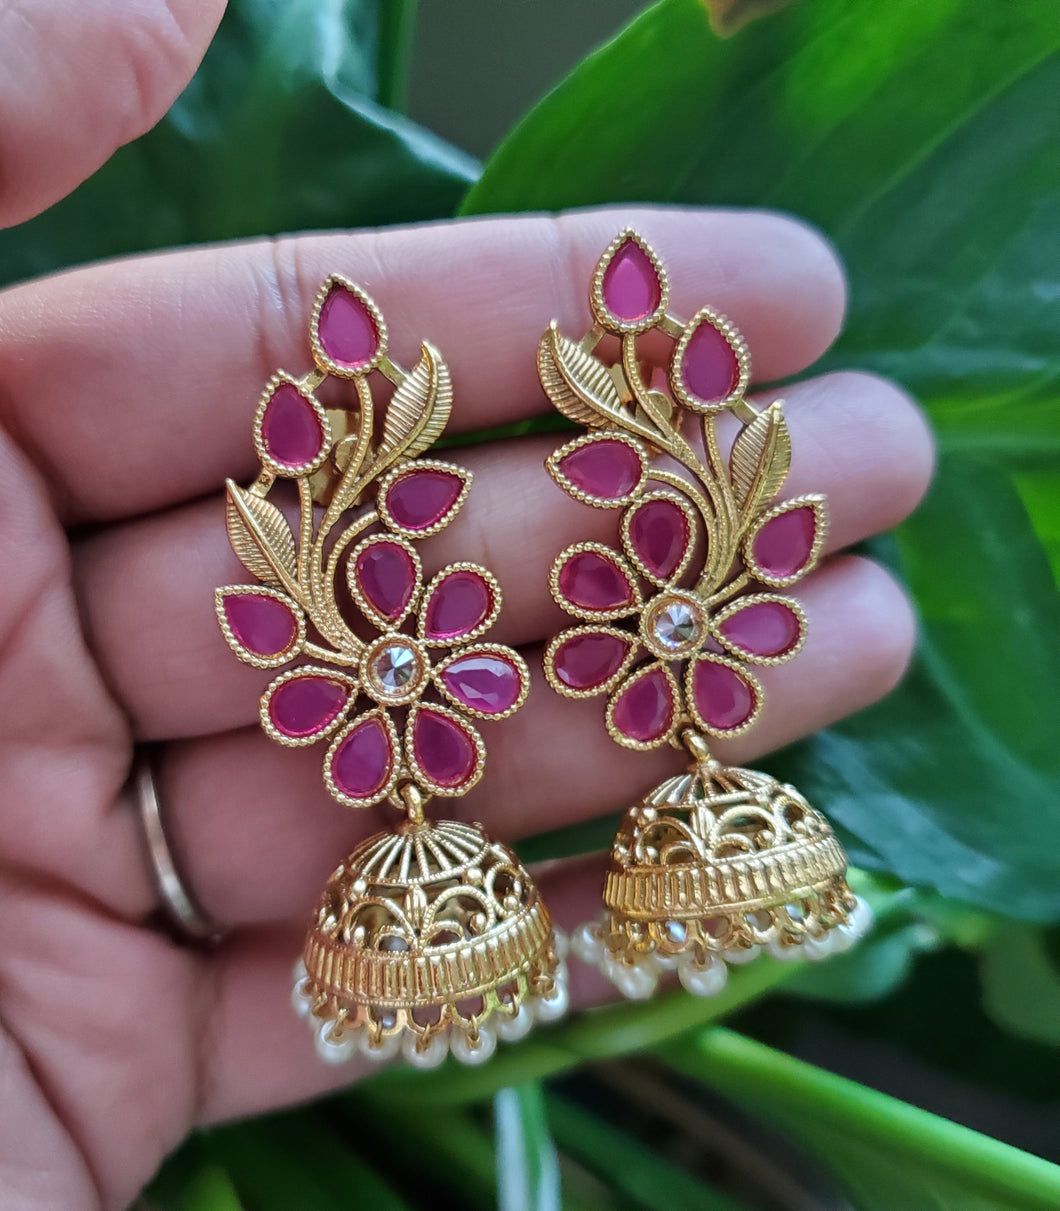 Antique Jhumkis With Gold Plating